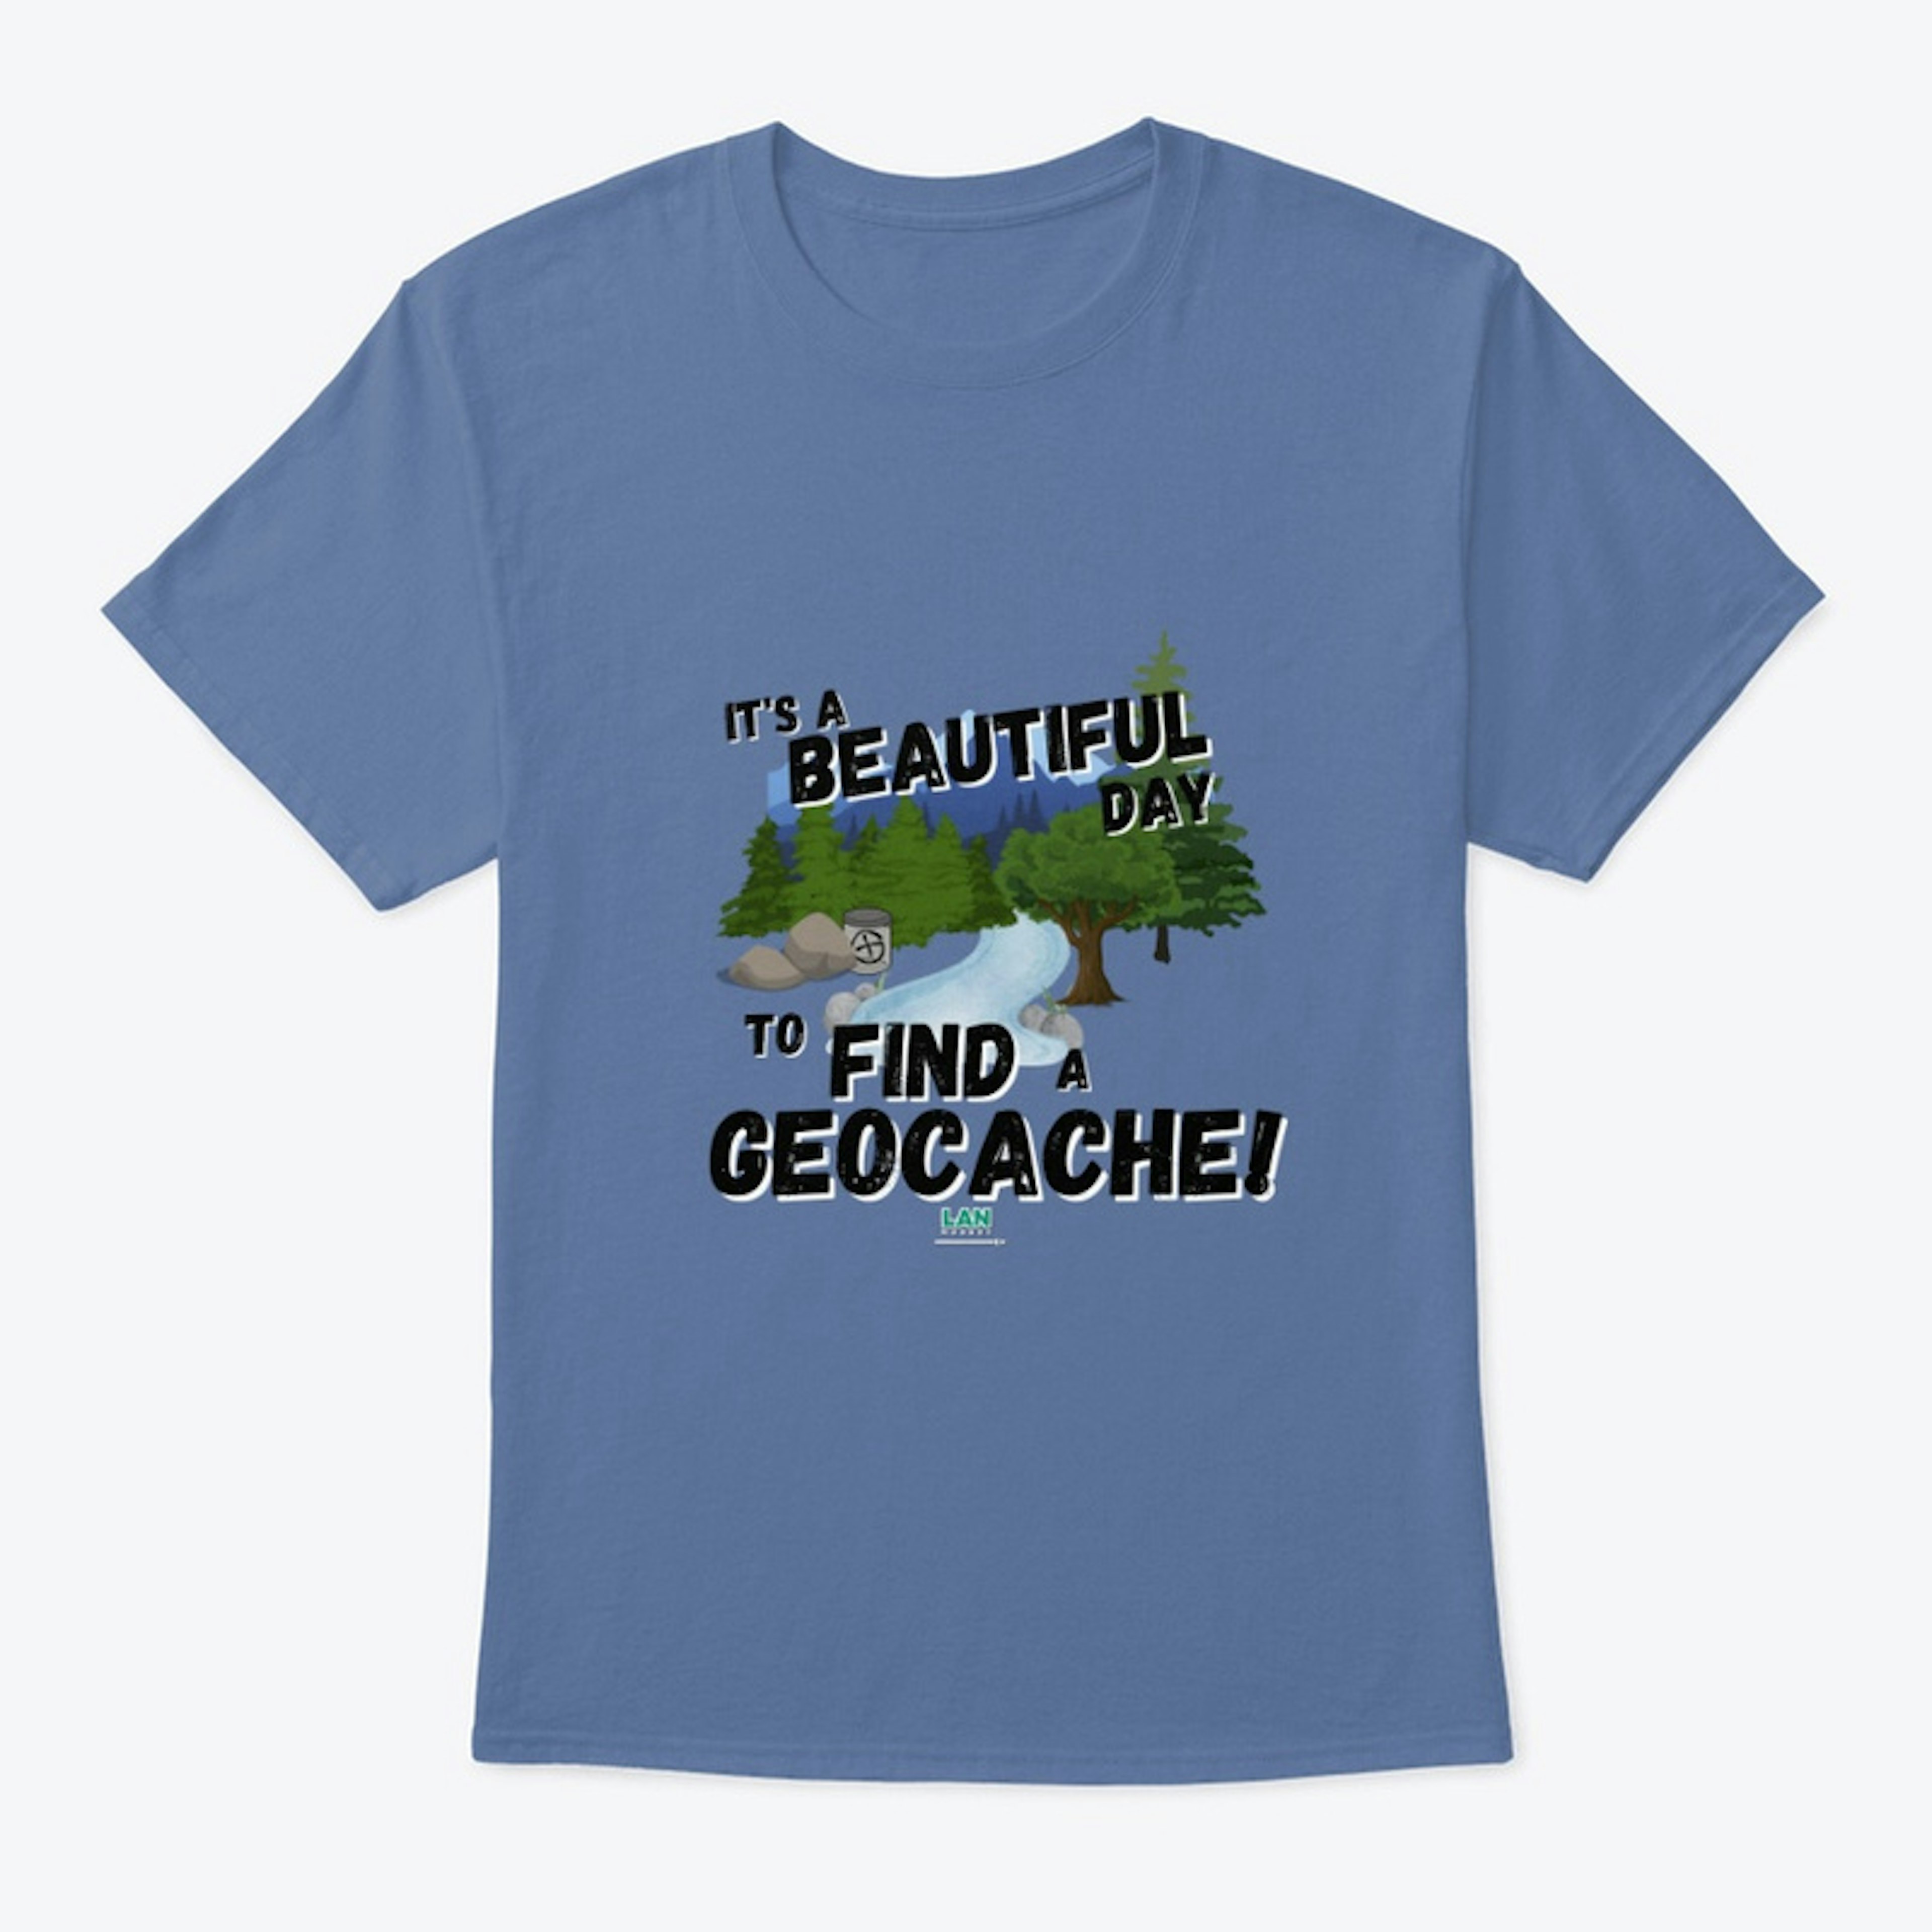 Be Beautiful and Find Geocaches